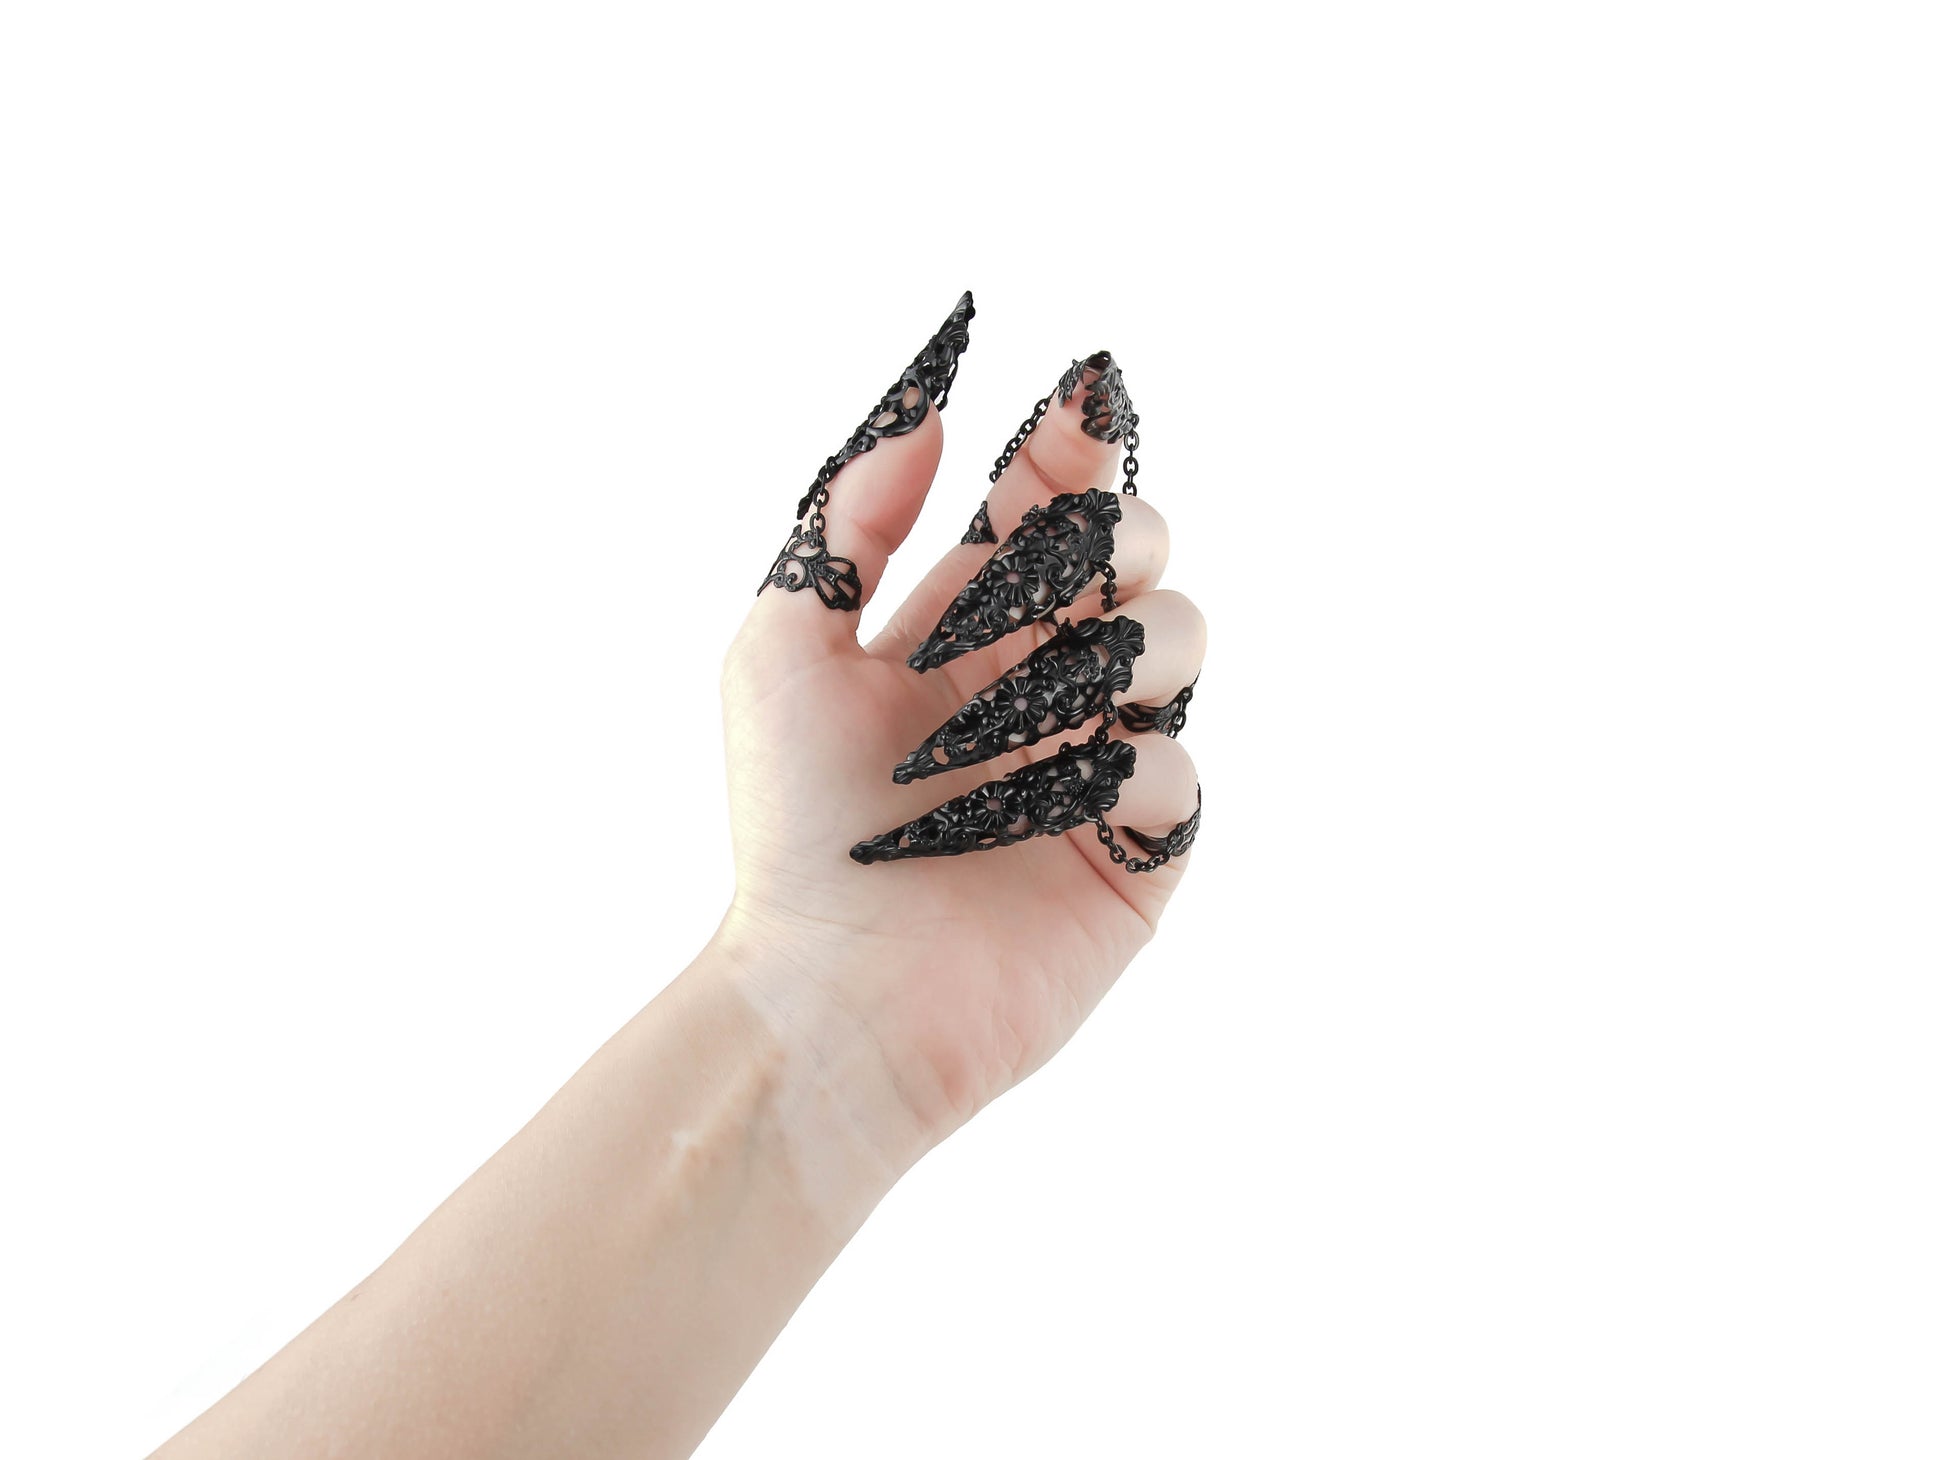 Embrace the edgy elegance of Myril Jewels with this bold, handcrafted full hand set of armored claw rings, designed for the dark-avantgarde enthusiast. These elaborate black claw rings reflect a Neo Gothic vibe, perfect for gothic-chic, Witchcore, and Whimsigoth styles, making them an audacious choice for Halloween, punk events, or as a distinctive addition to everyday wear.